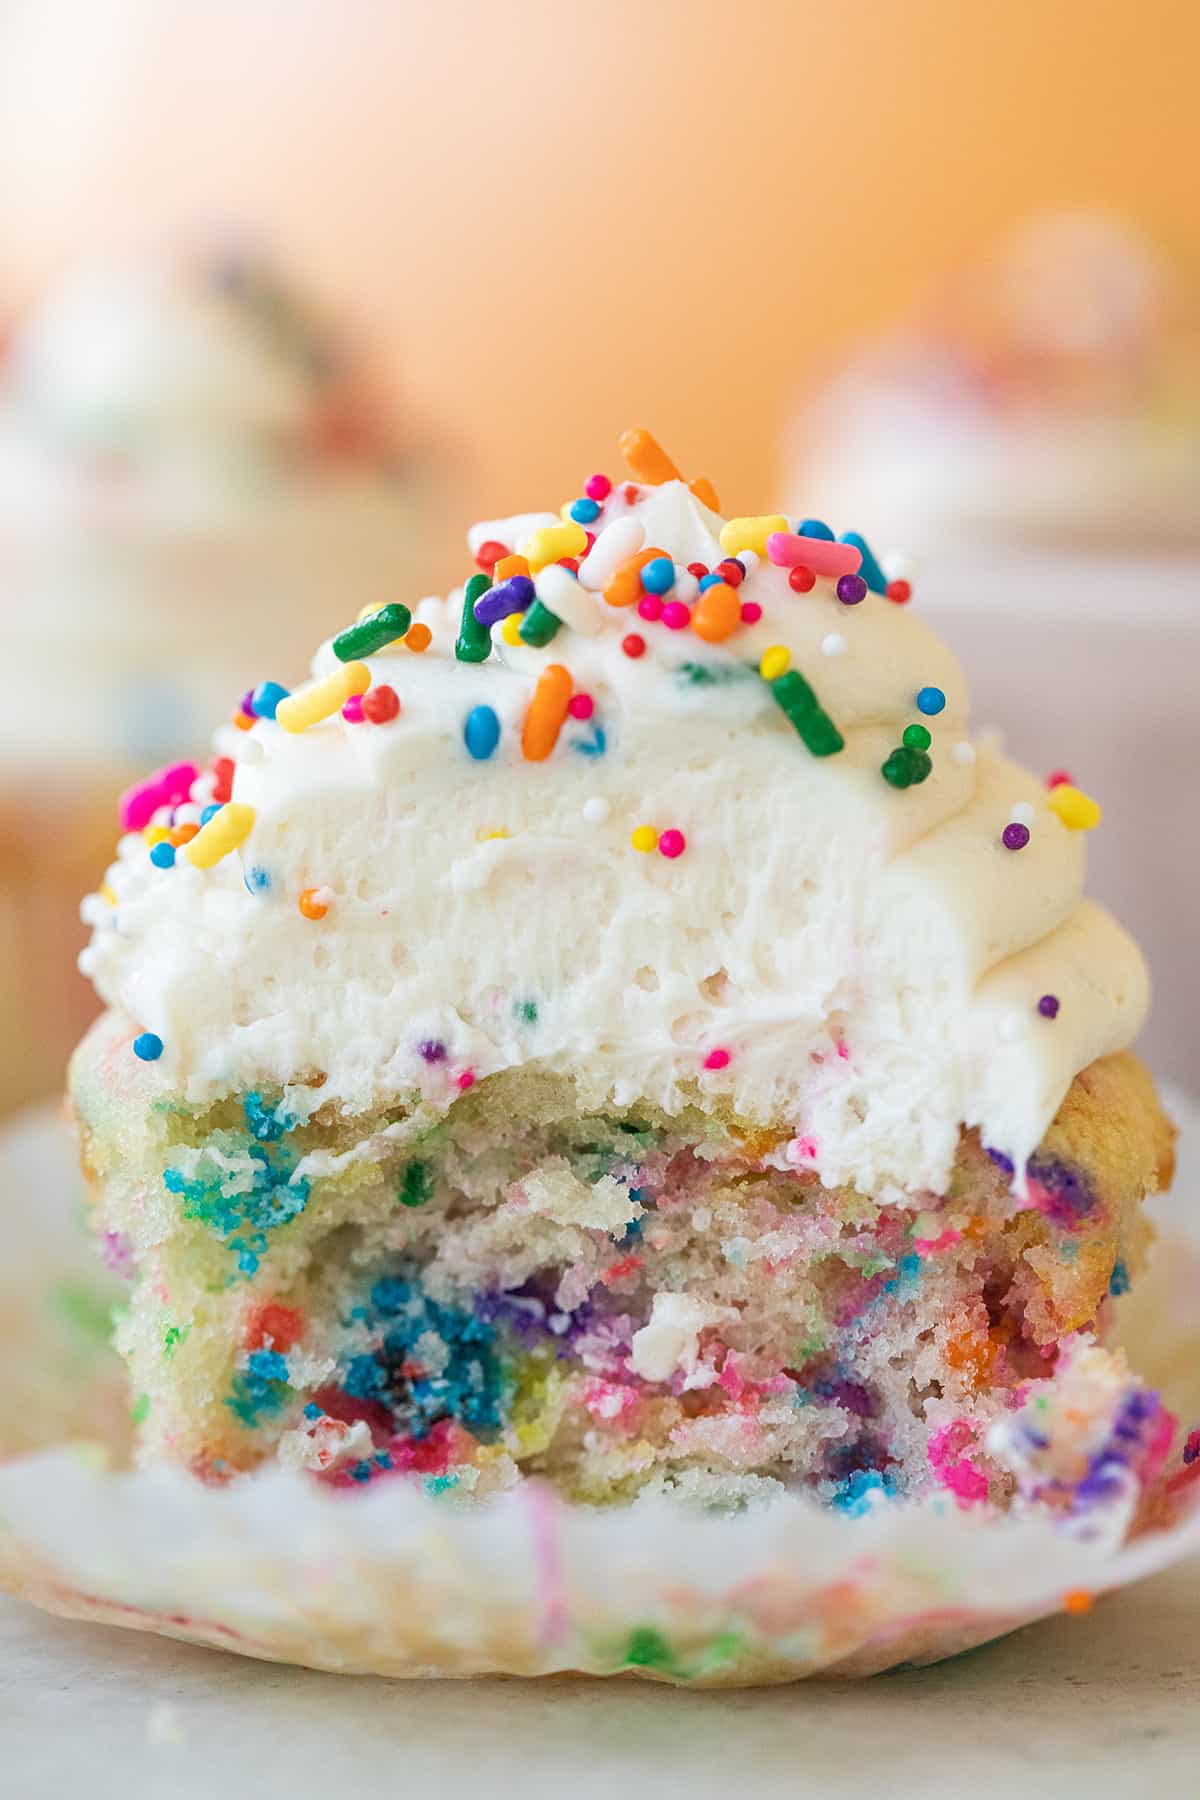 Confetti cupcake with bite taken out.